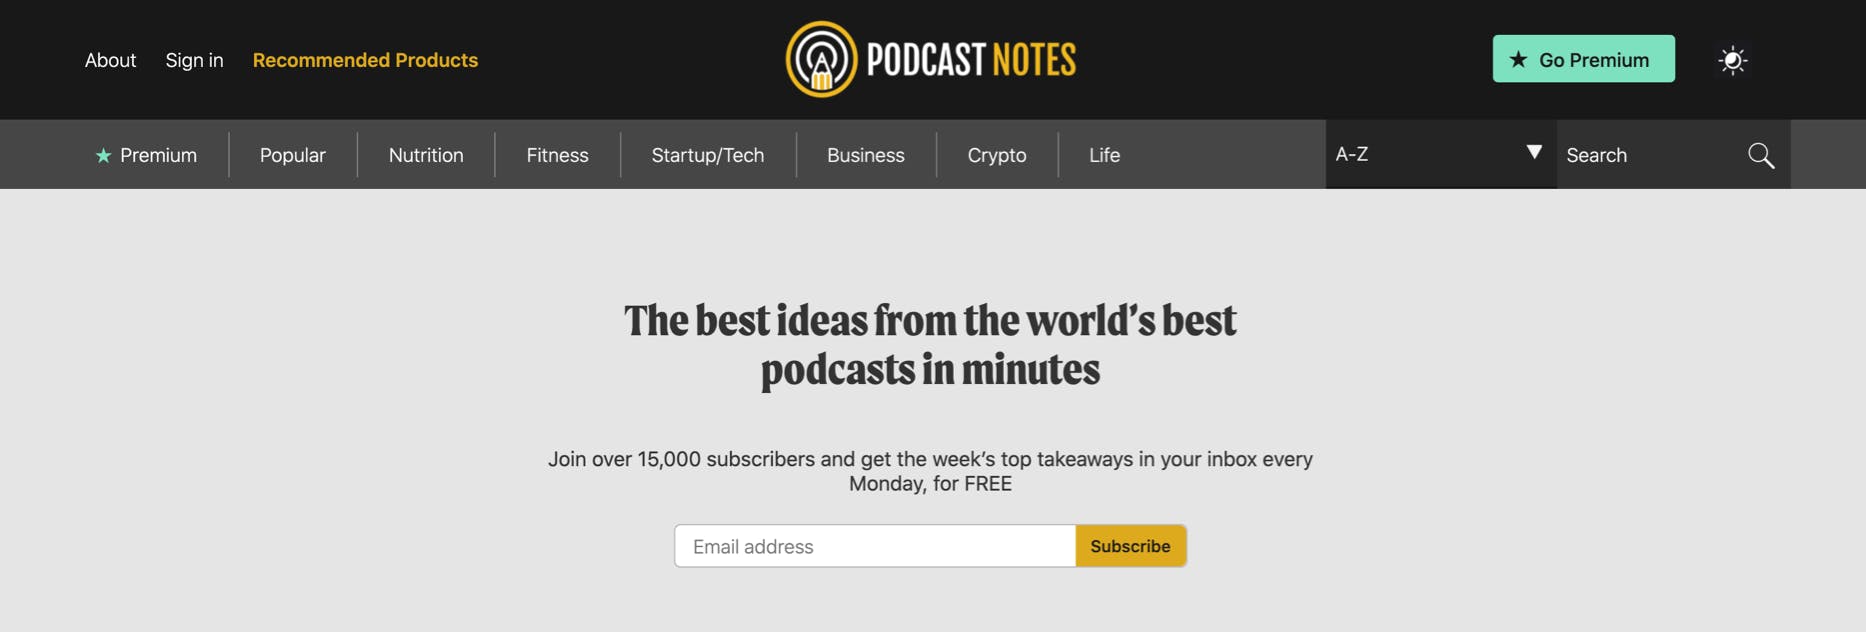 Podcast Notes homepage with black header, gray icons, and a newsletter subscription field